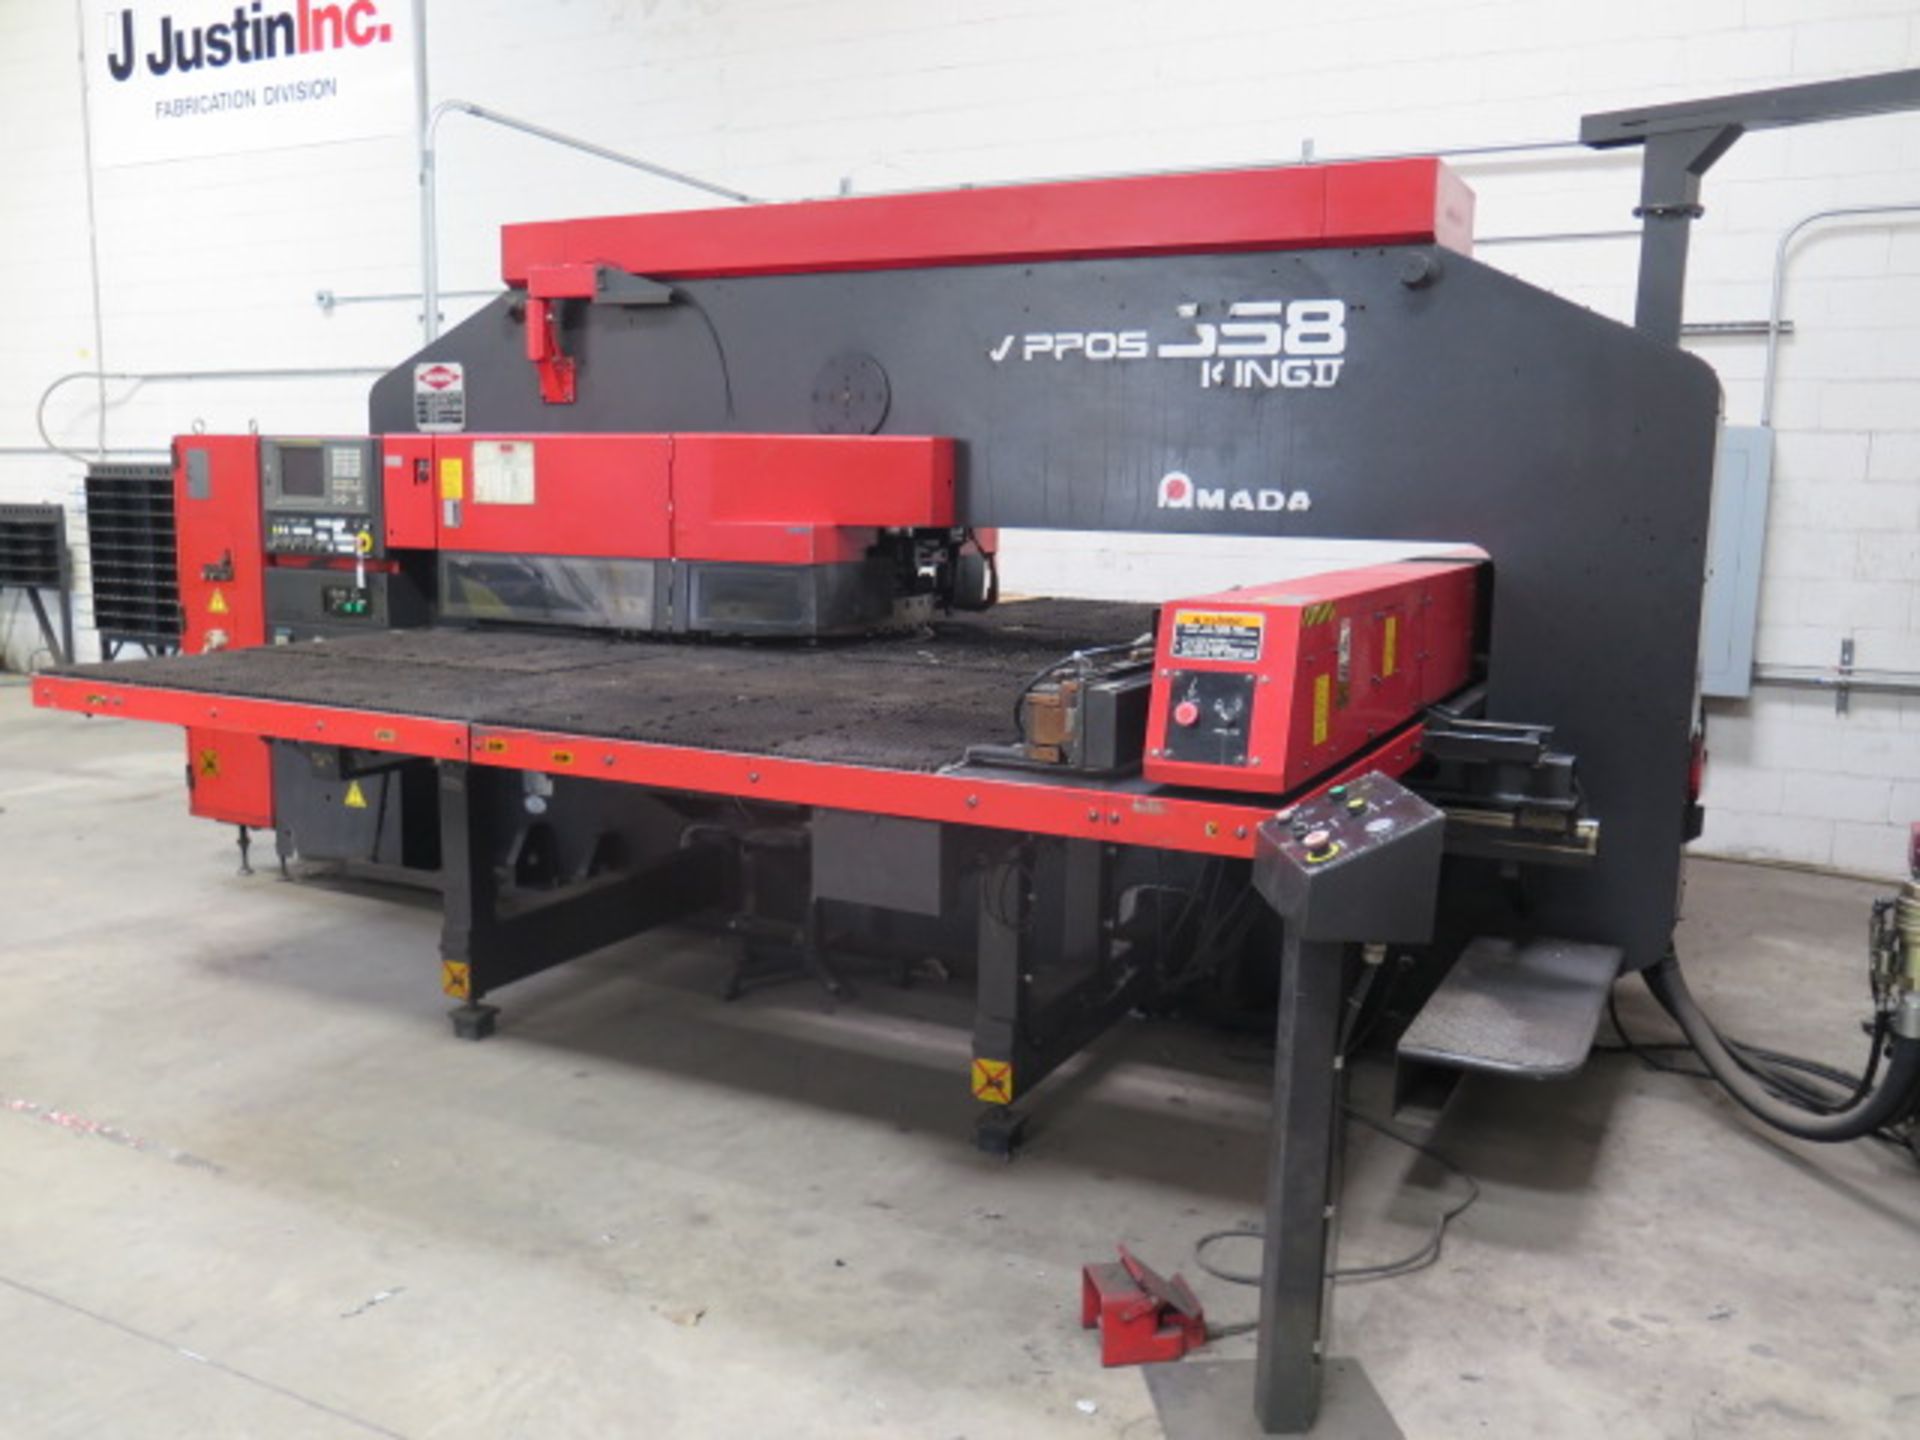 1998 Amada VIPROS 358 King II 30-Ton CNC Turret Punch Press s/n 35840083 w/ Fanuc 18-P, SOLD AS IS - Image 3 of 18